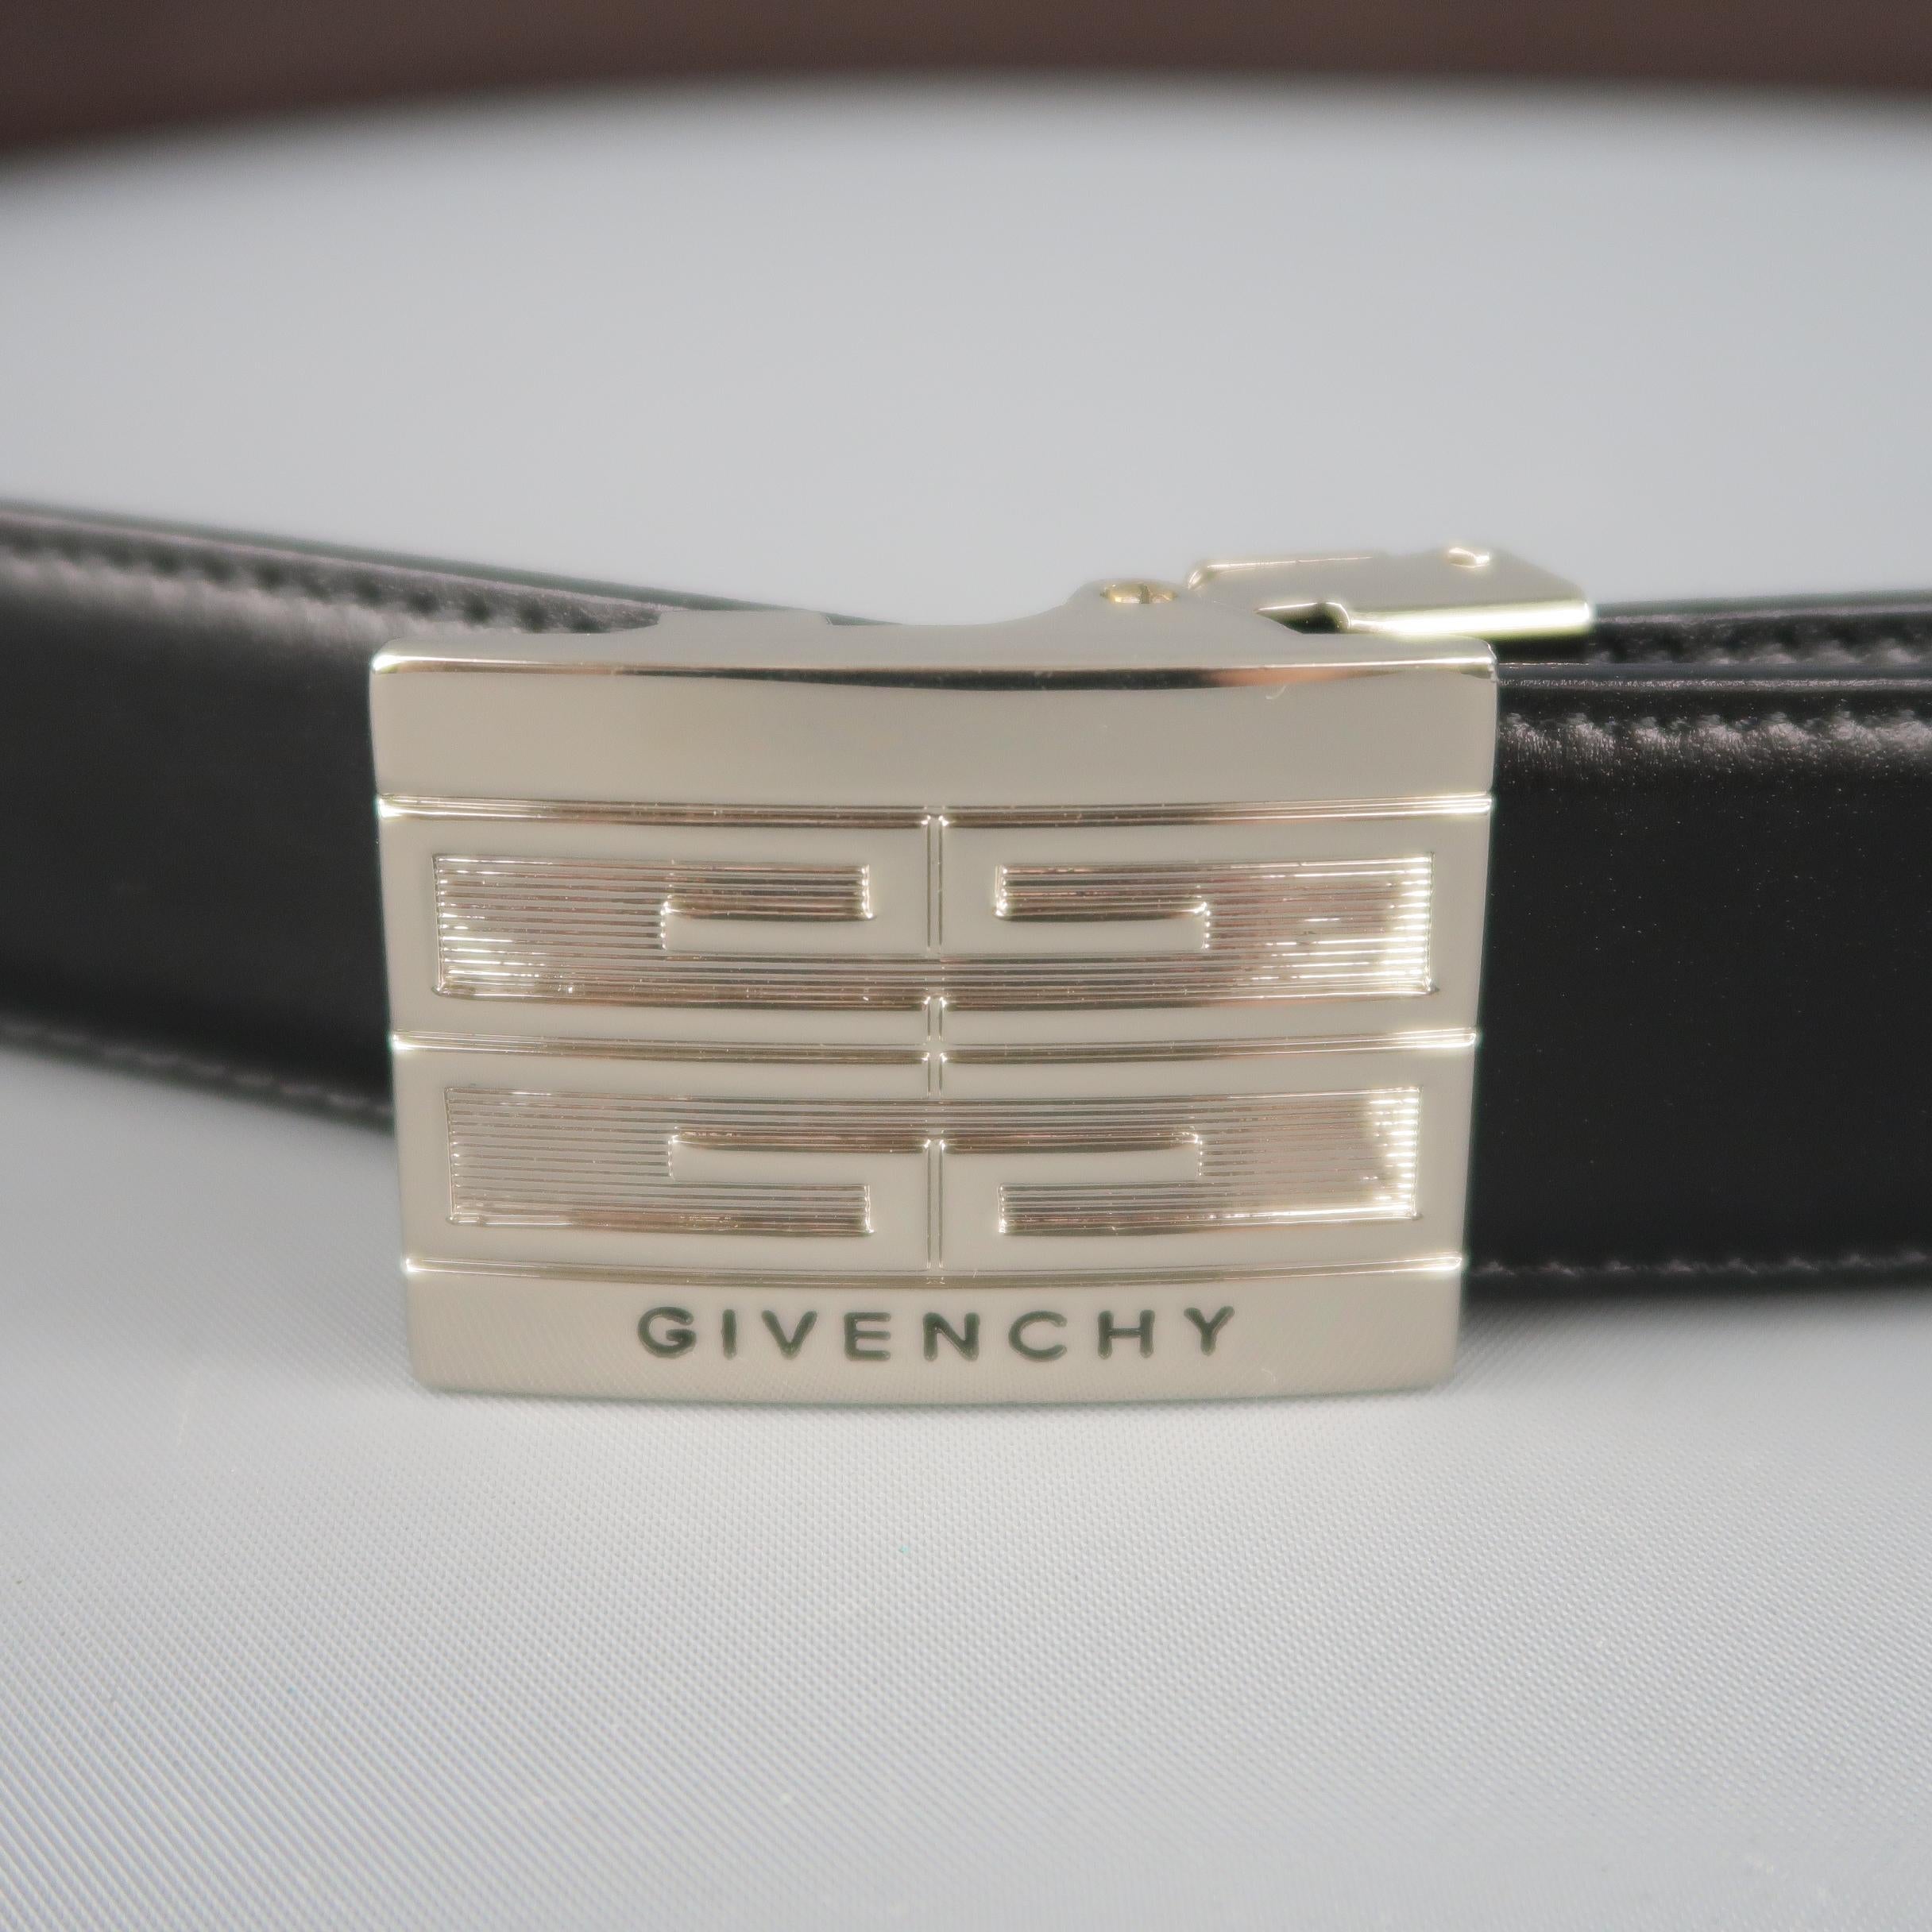 GIVENCHY dress belt features a dual tone brown and black reversible clamp closure strap with silver tone rectangular logo embossed buckle. Made in Italy.
 
New with Tags.
Marked: (no size)
 
Length: 50 in.
Width: 1 in.
Fits: Up to 46 in.